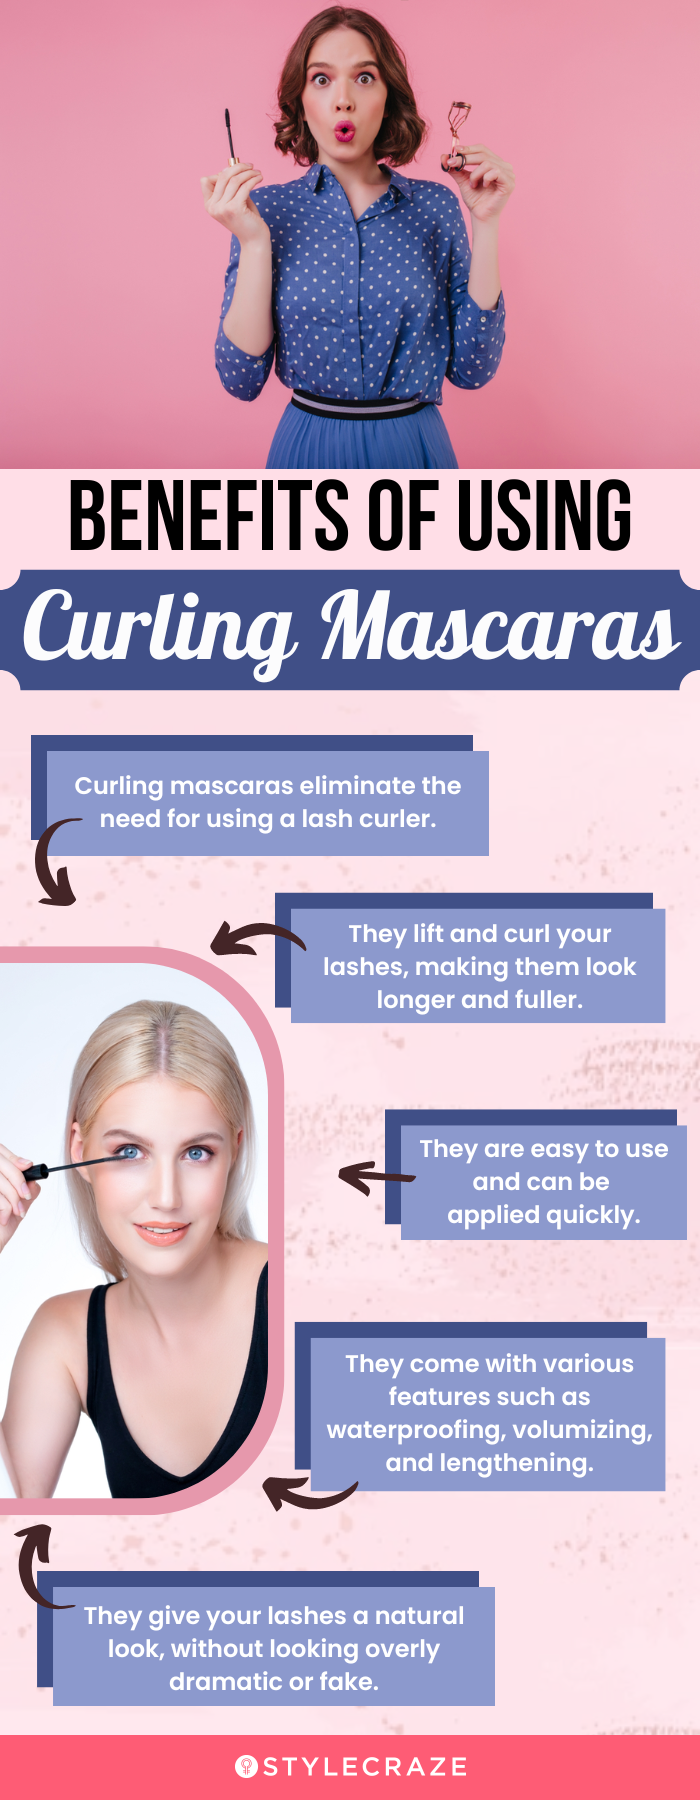 Benefits Of Using Curling Mascaras (infographic)